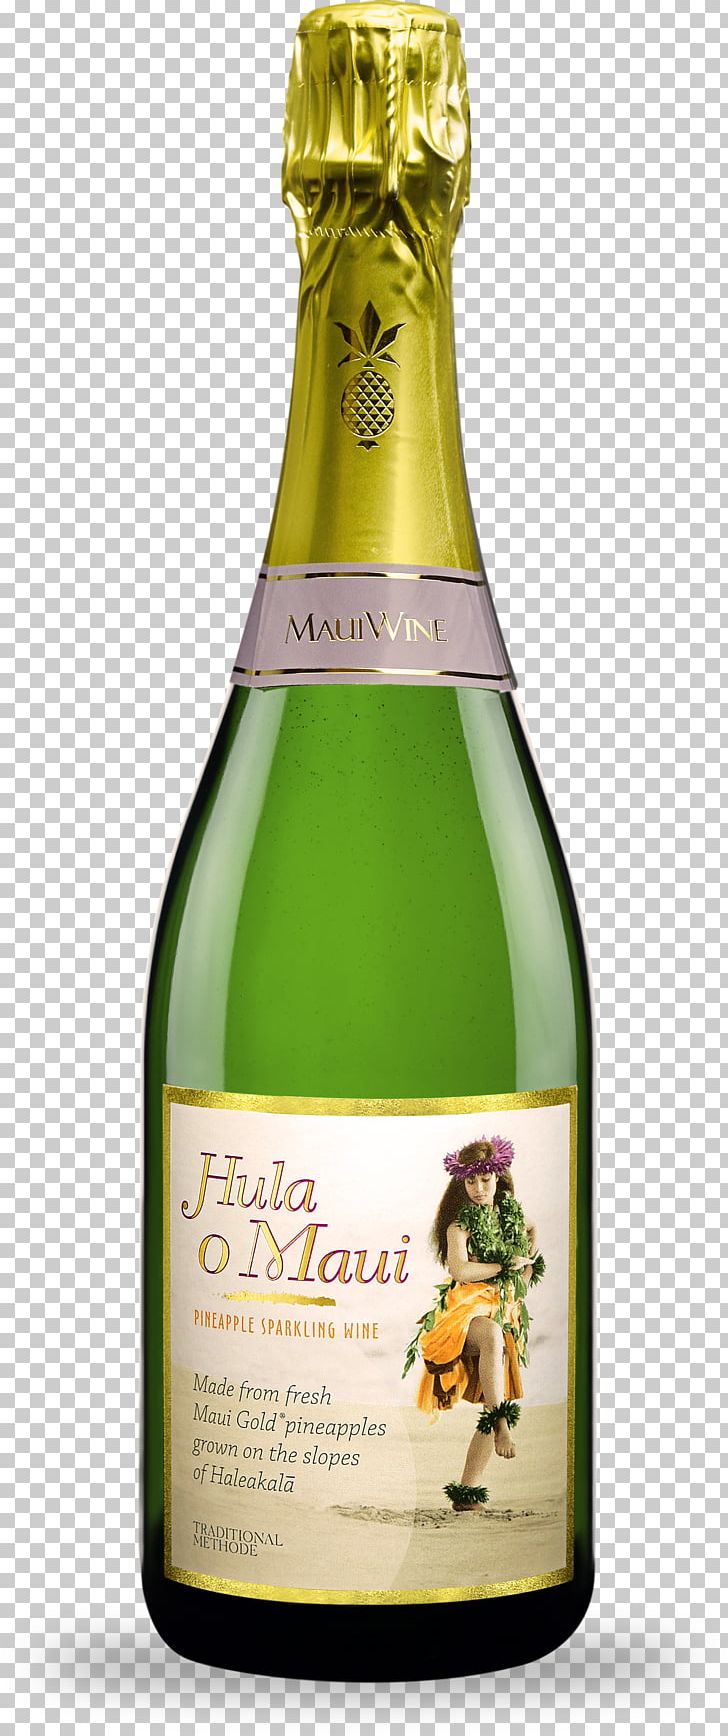 Champagne Sparkling Wine White Wine Pinot Blanc PNG, Clipart, Alcoholic Beverage, Alcoholic Drink, Bottle, Champagne, Chardonnay Free PNG Download